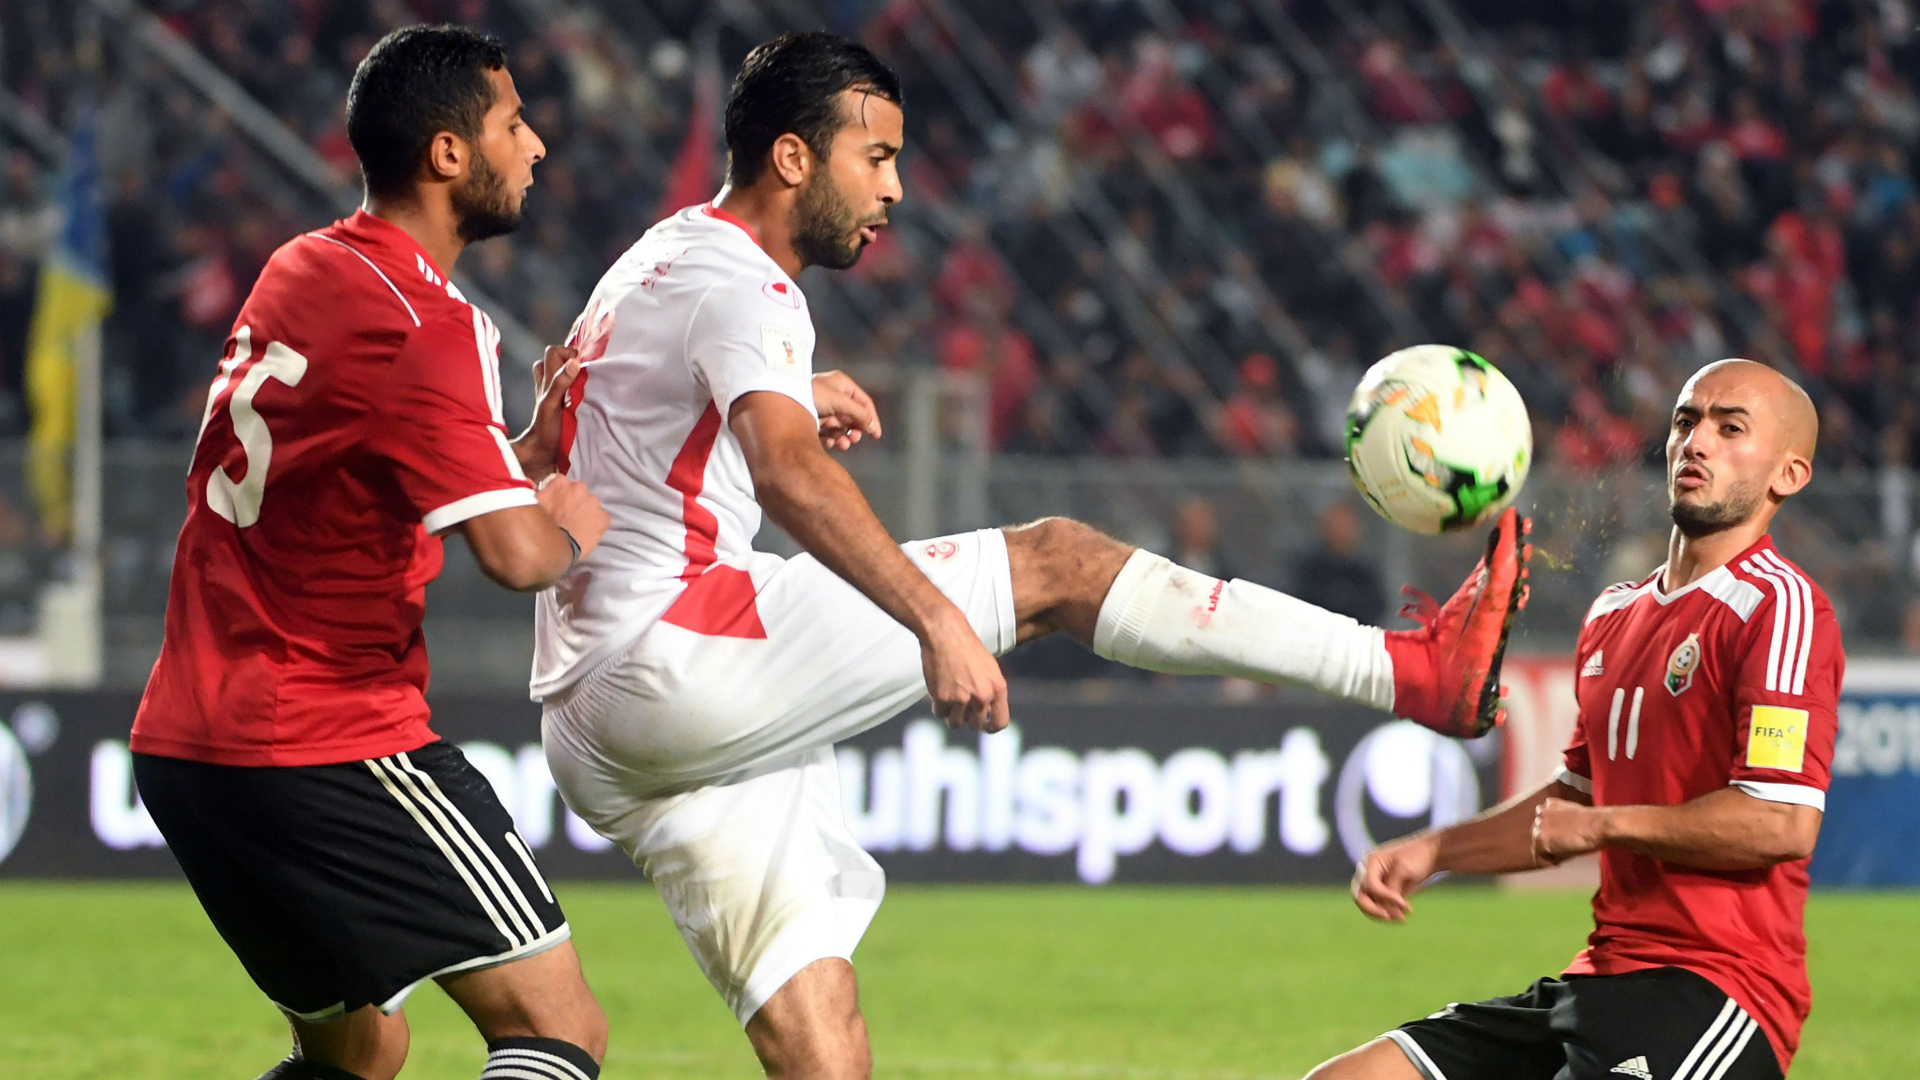 2019 Africa Cup of Nations: Football now doesn't depend on history - Tunisia forward Khenissi